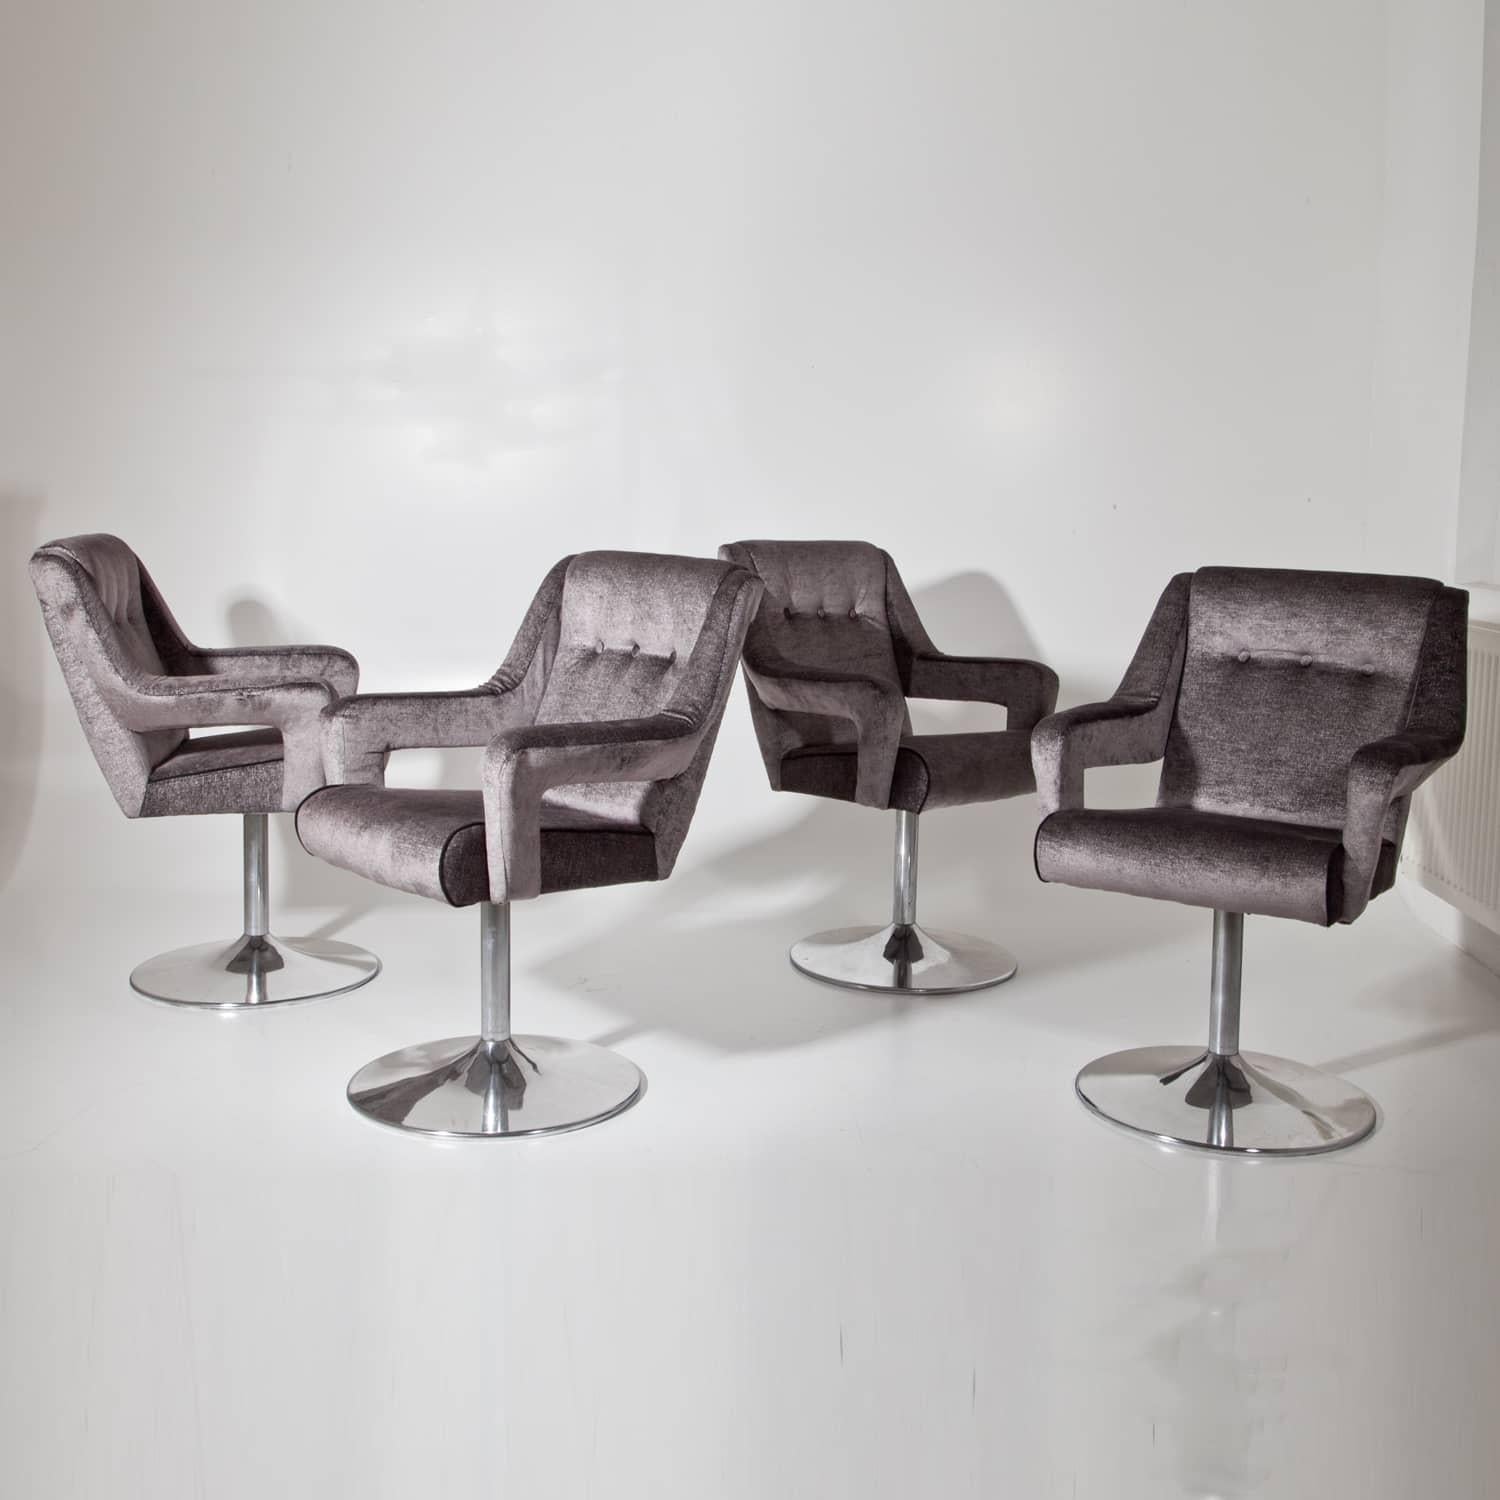 Set of four swivel chairs on round chromed legs and upholstered seats with armrests. The chairs were reupholstered with a high quality fabric in grey with silver-colored threads.